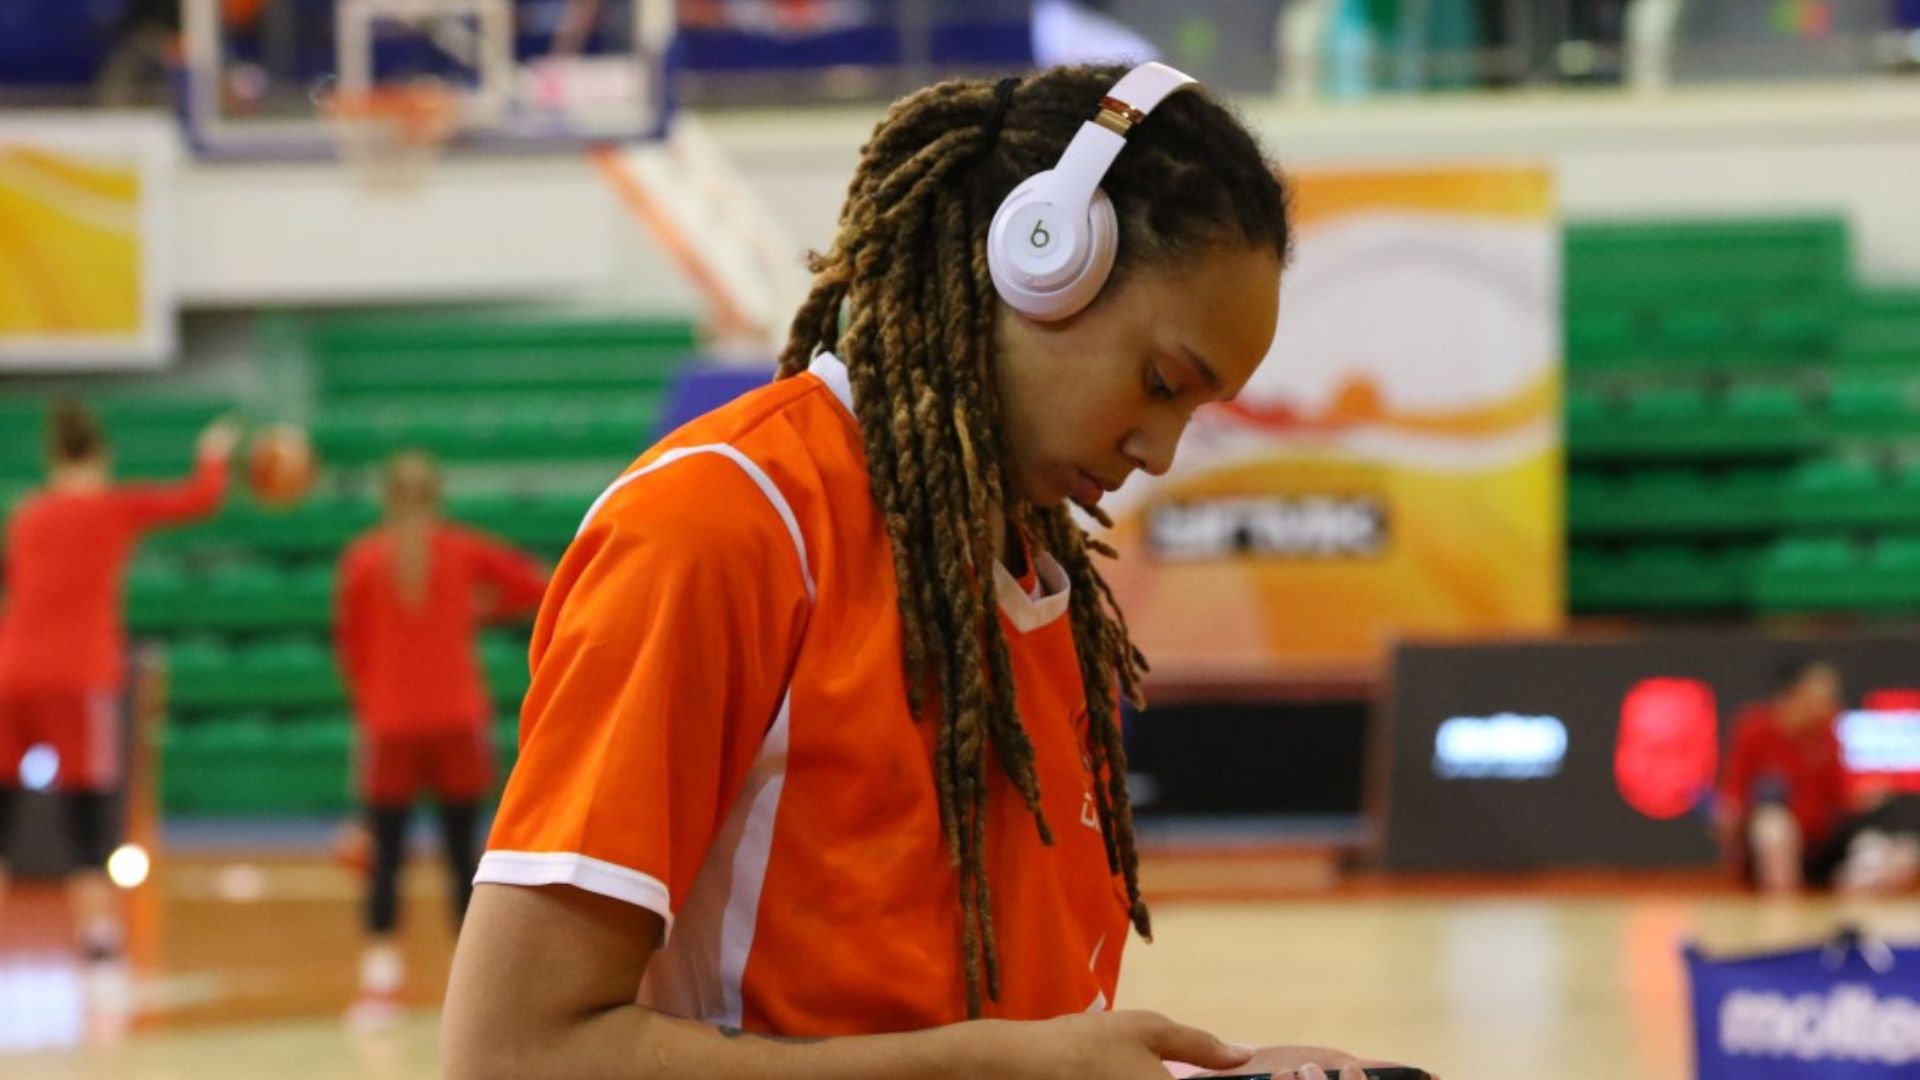 brittney griner mba wikimedia commons